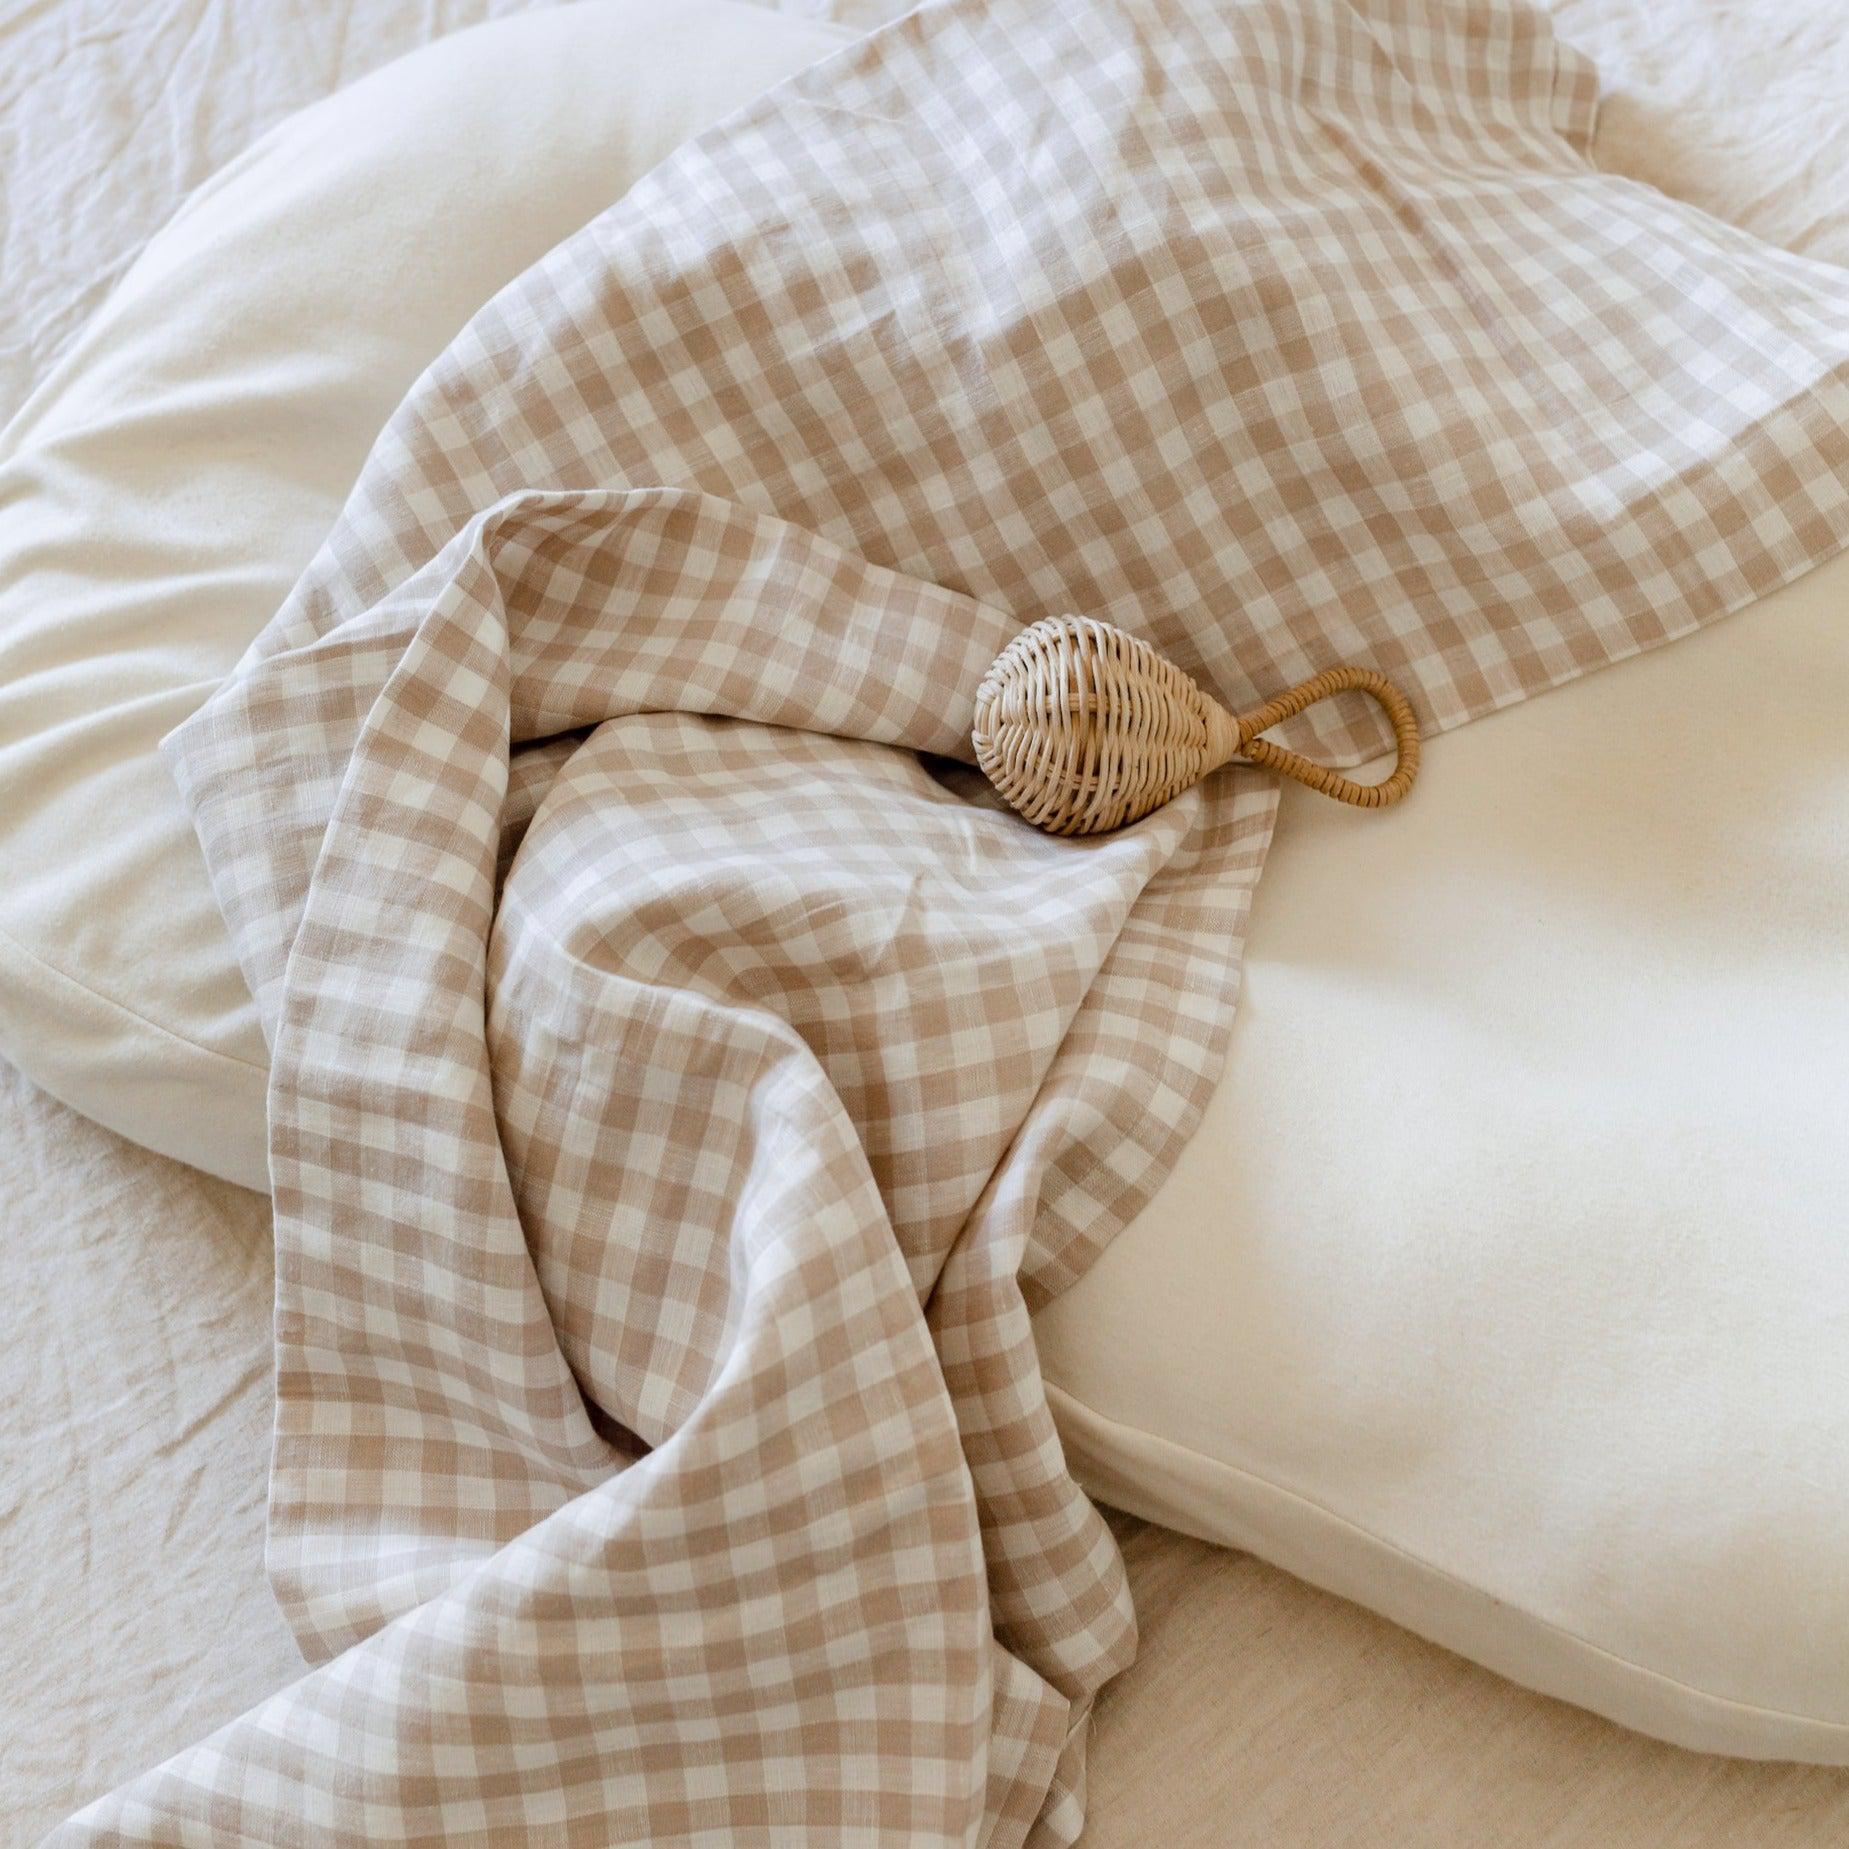 A white and beige checkered blanket, reminiscent of French linen styles, adorning a bed.